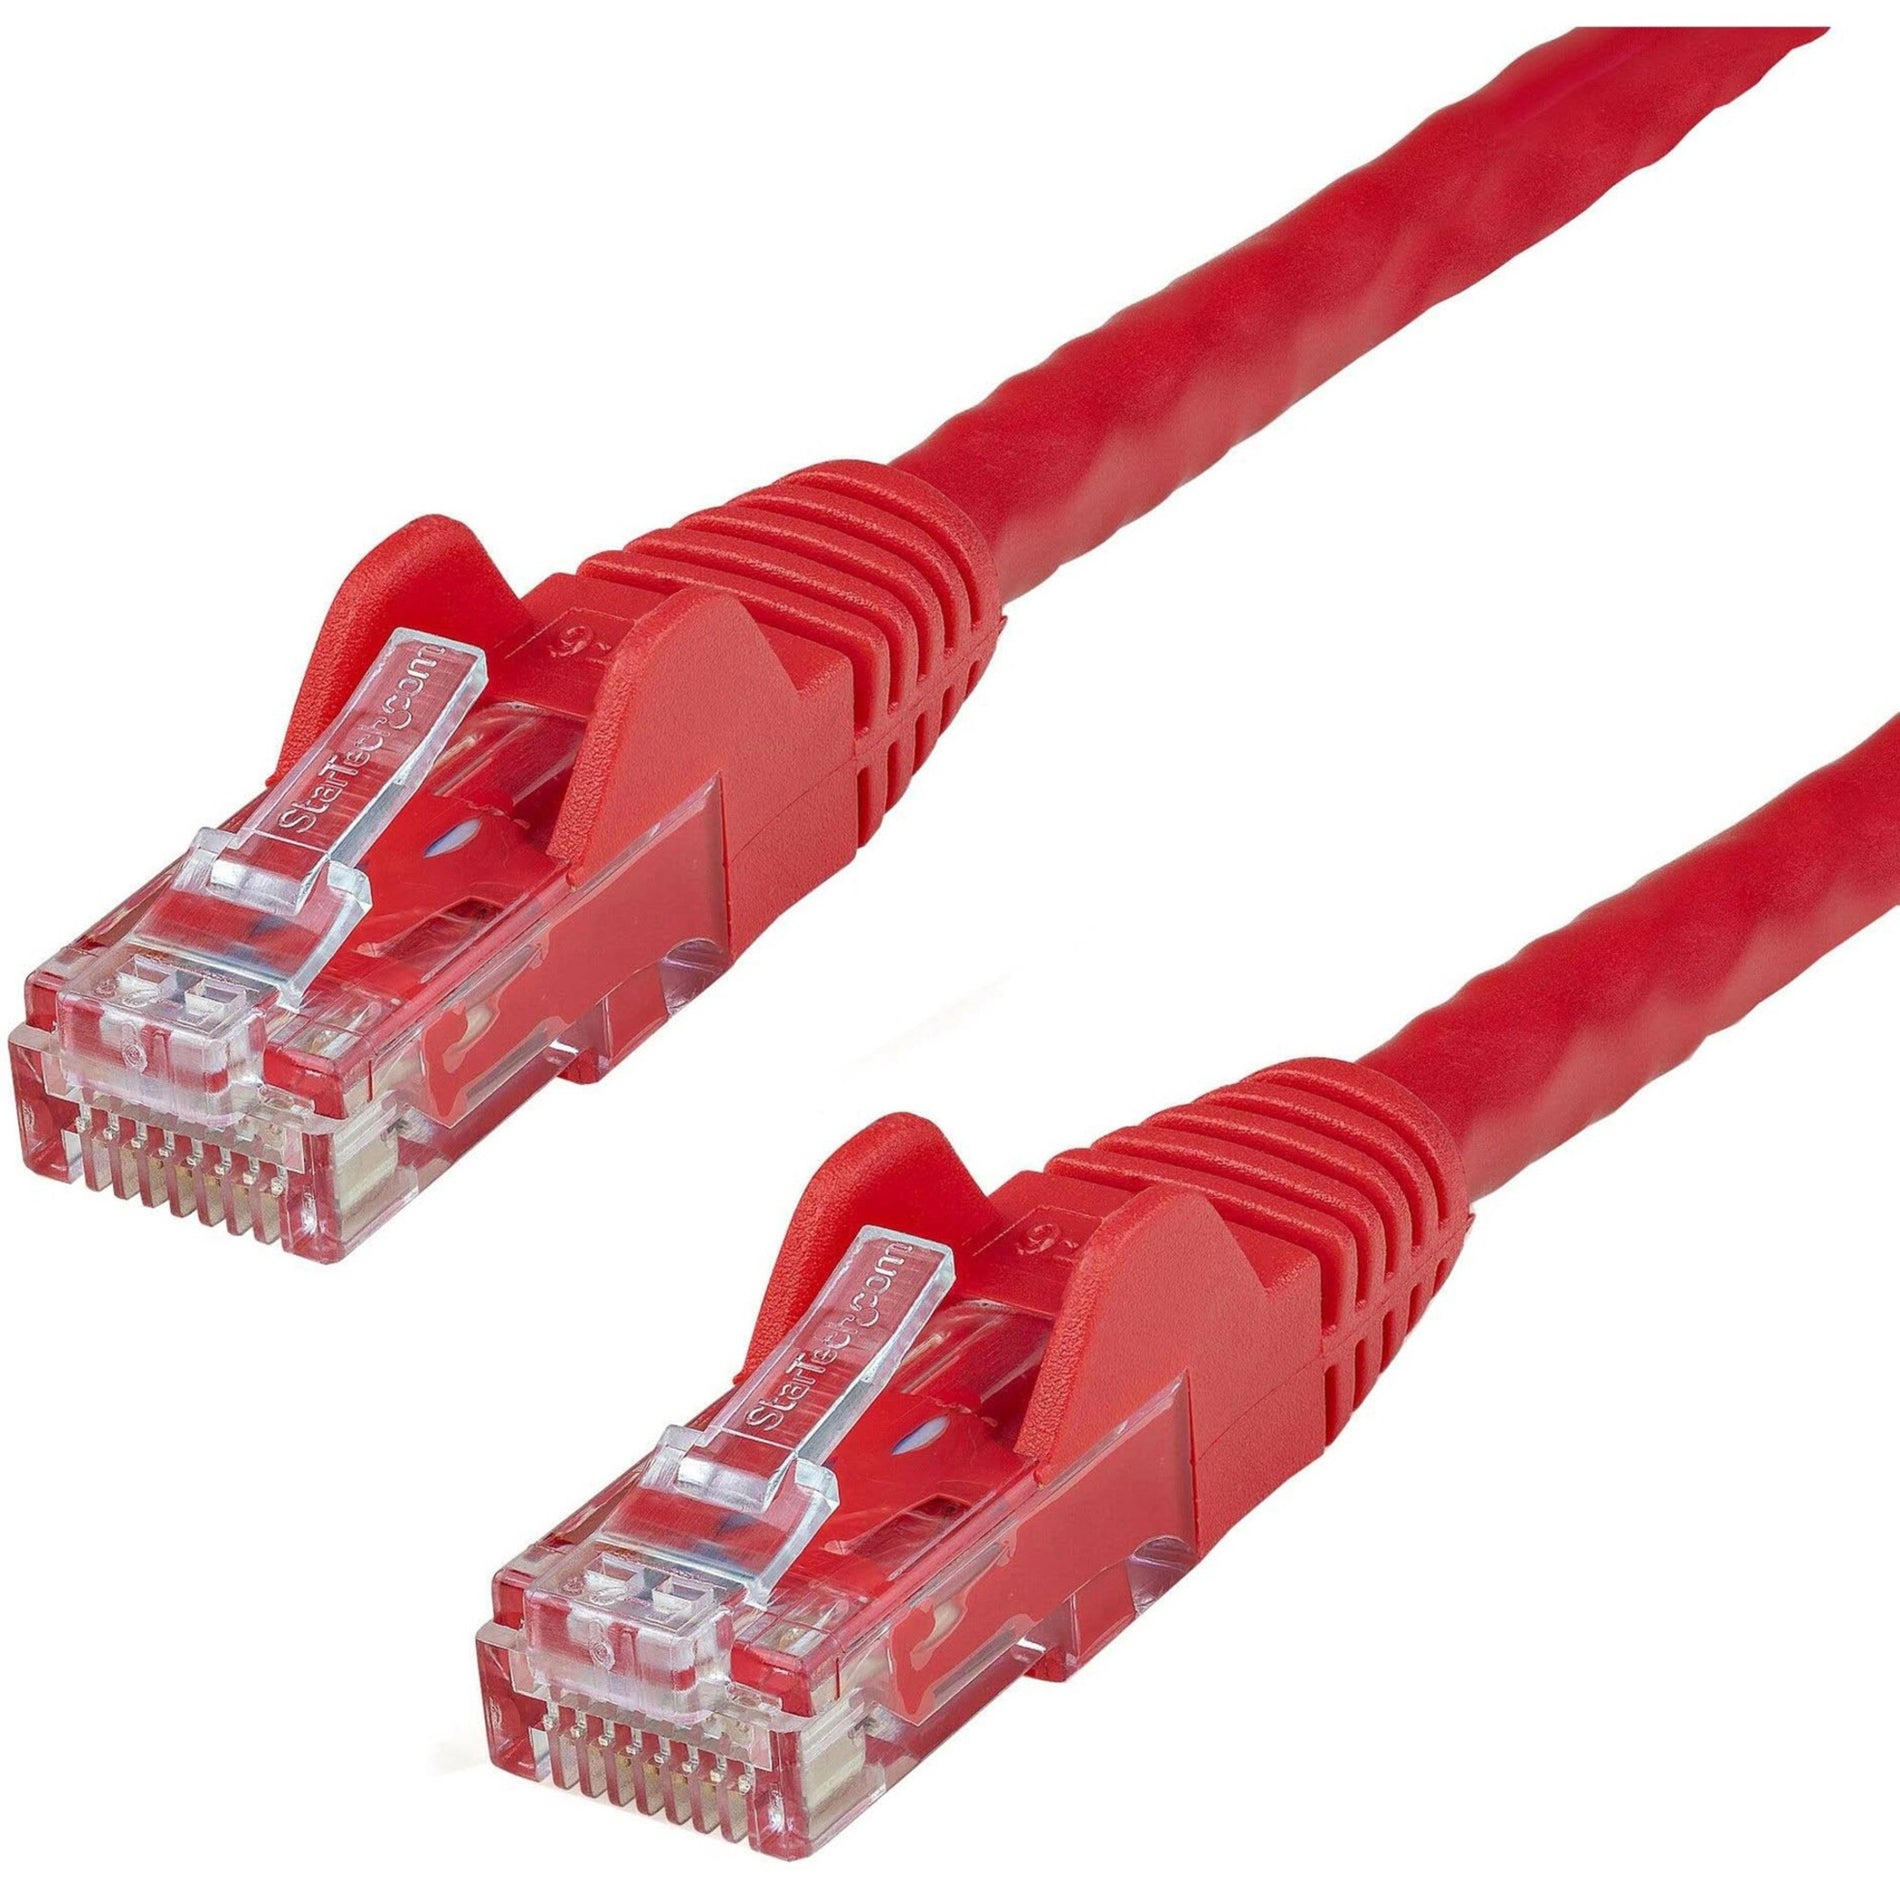 StarTech.com N6PATCH9RD Cat6 Patch Cable, 9 ft Red Ethernet Cable, Snagless RJ45 Connectors